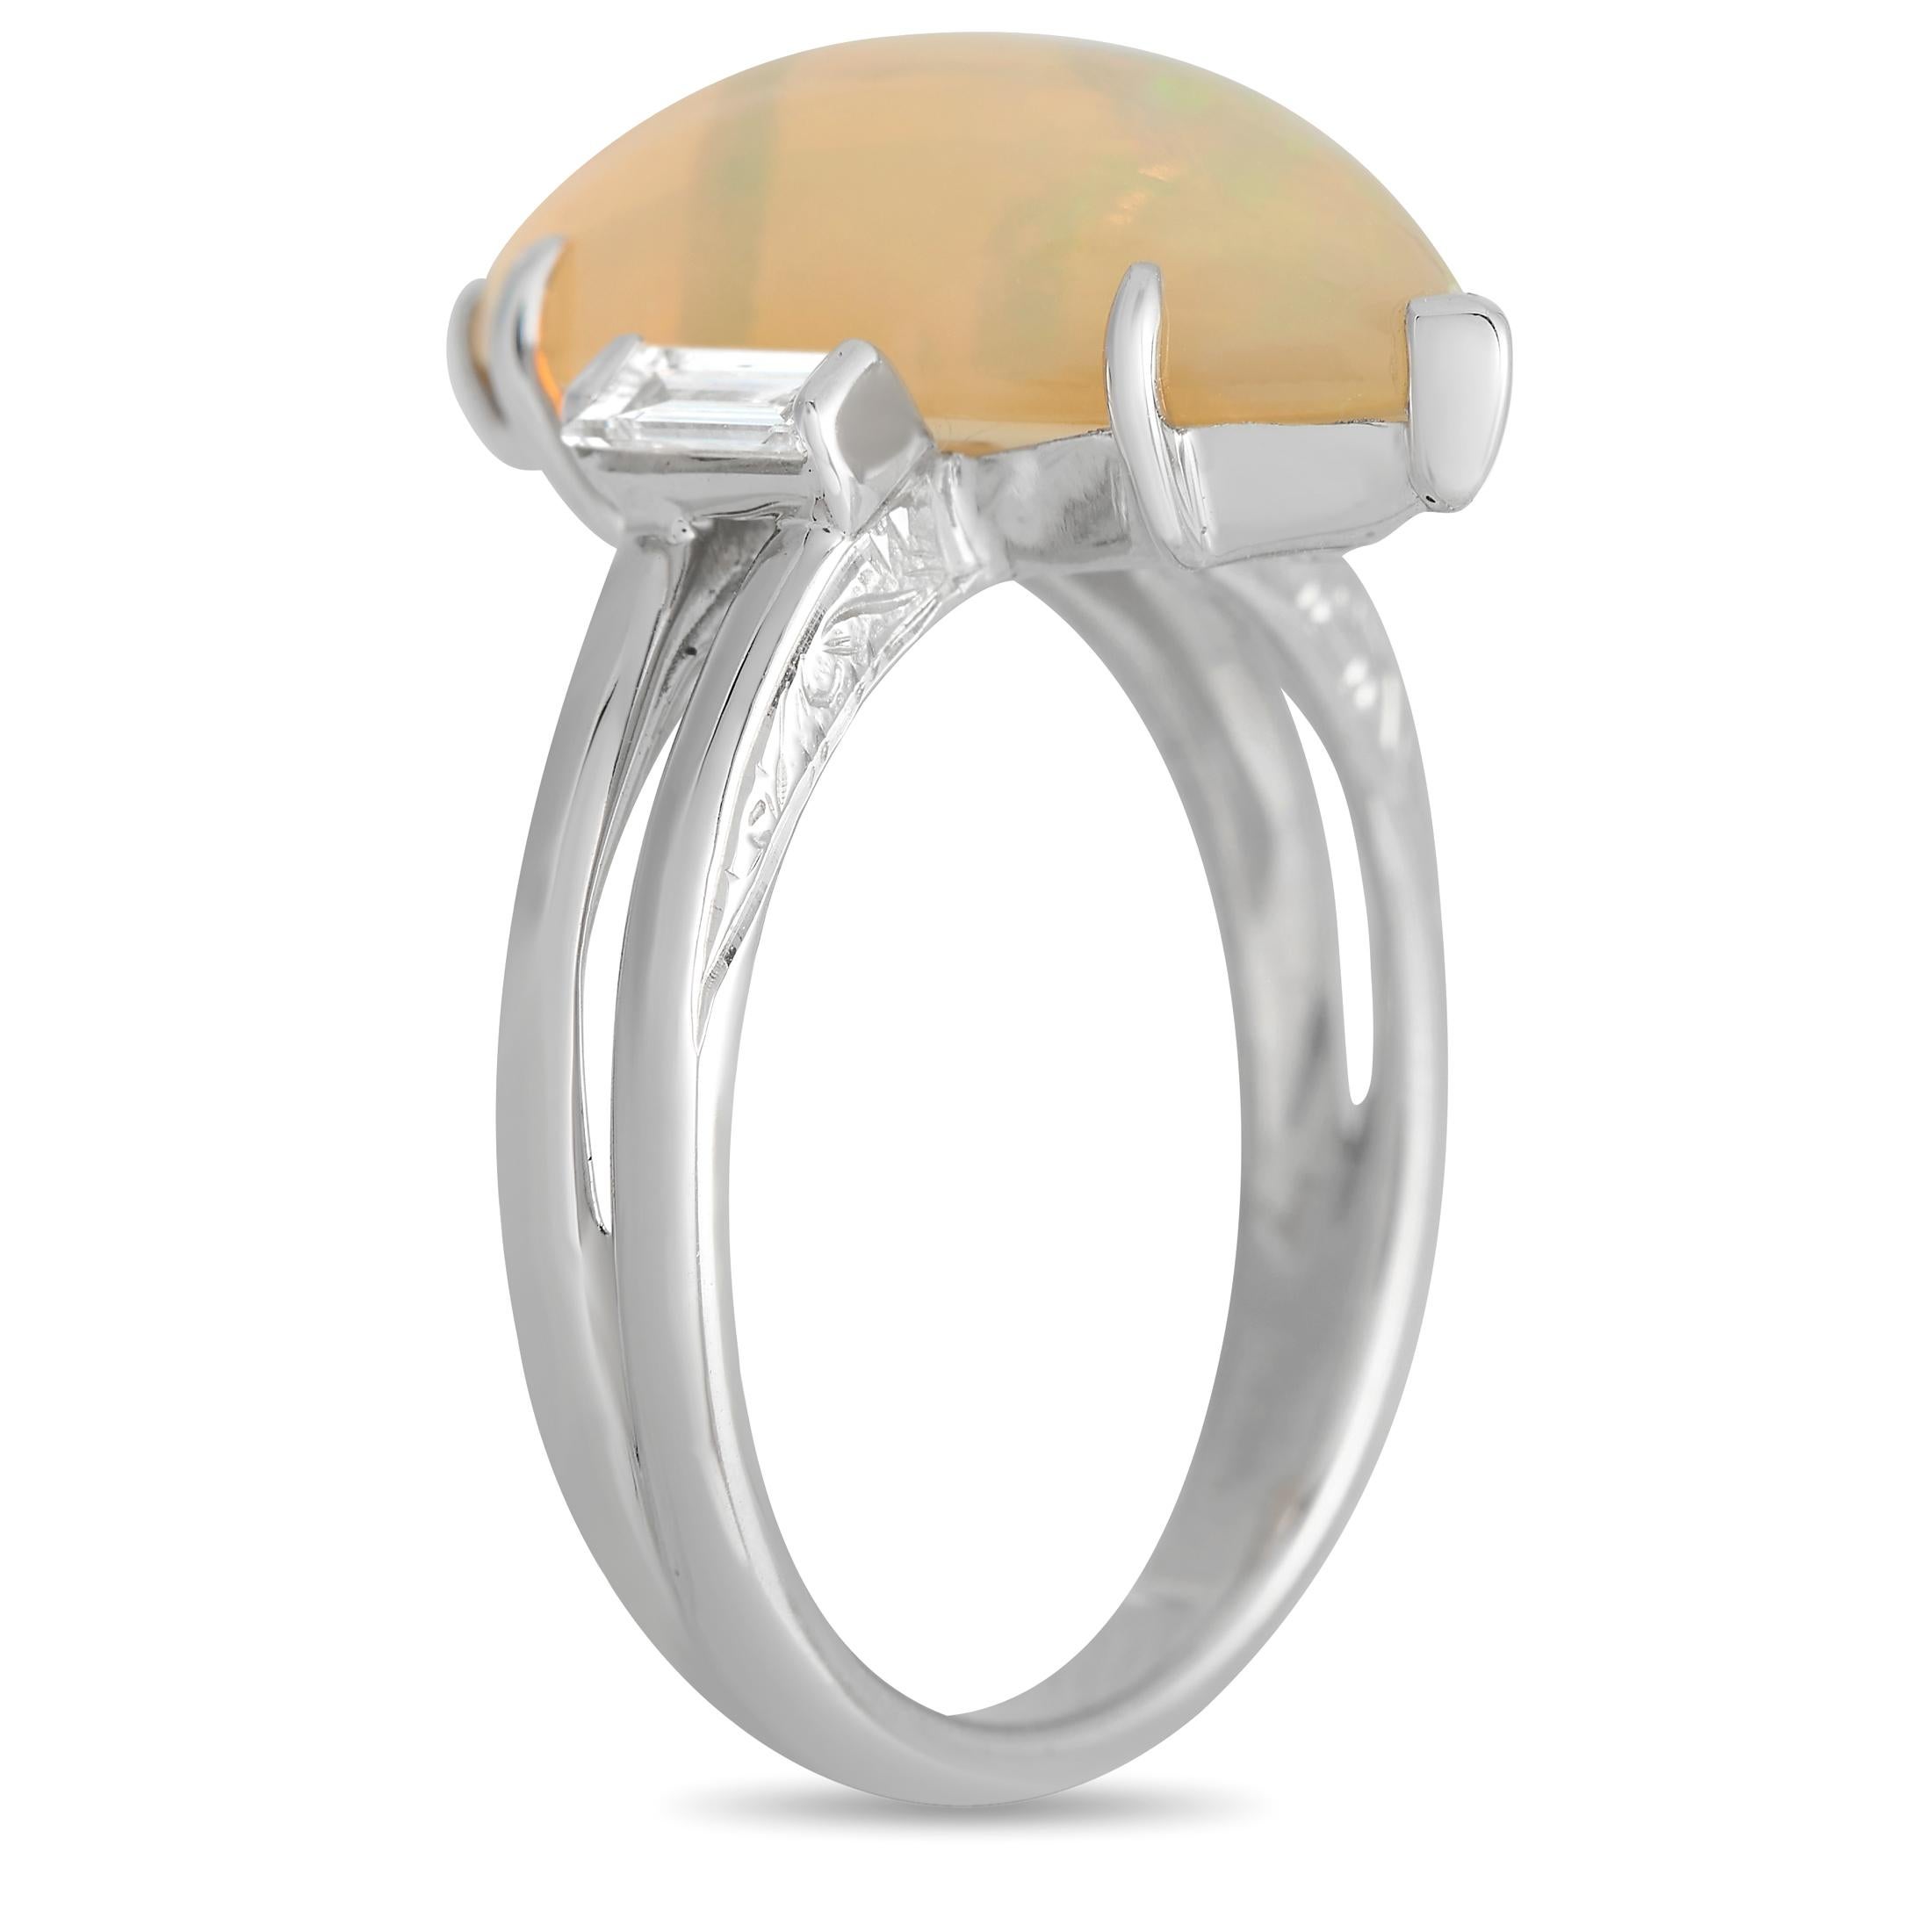 This captivating luxury ring is uniquely elegant. The striking marquise-cut 4.61 carat Opal center stone comes to life thanks to swirling colors, while Diamond accents totaling 0.25 carats provide the perfect amount of sparkle. This piece features a